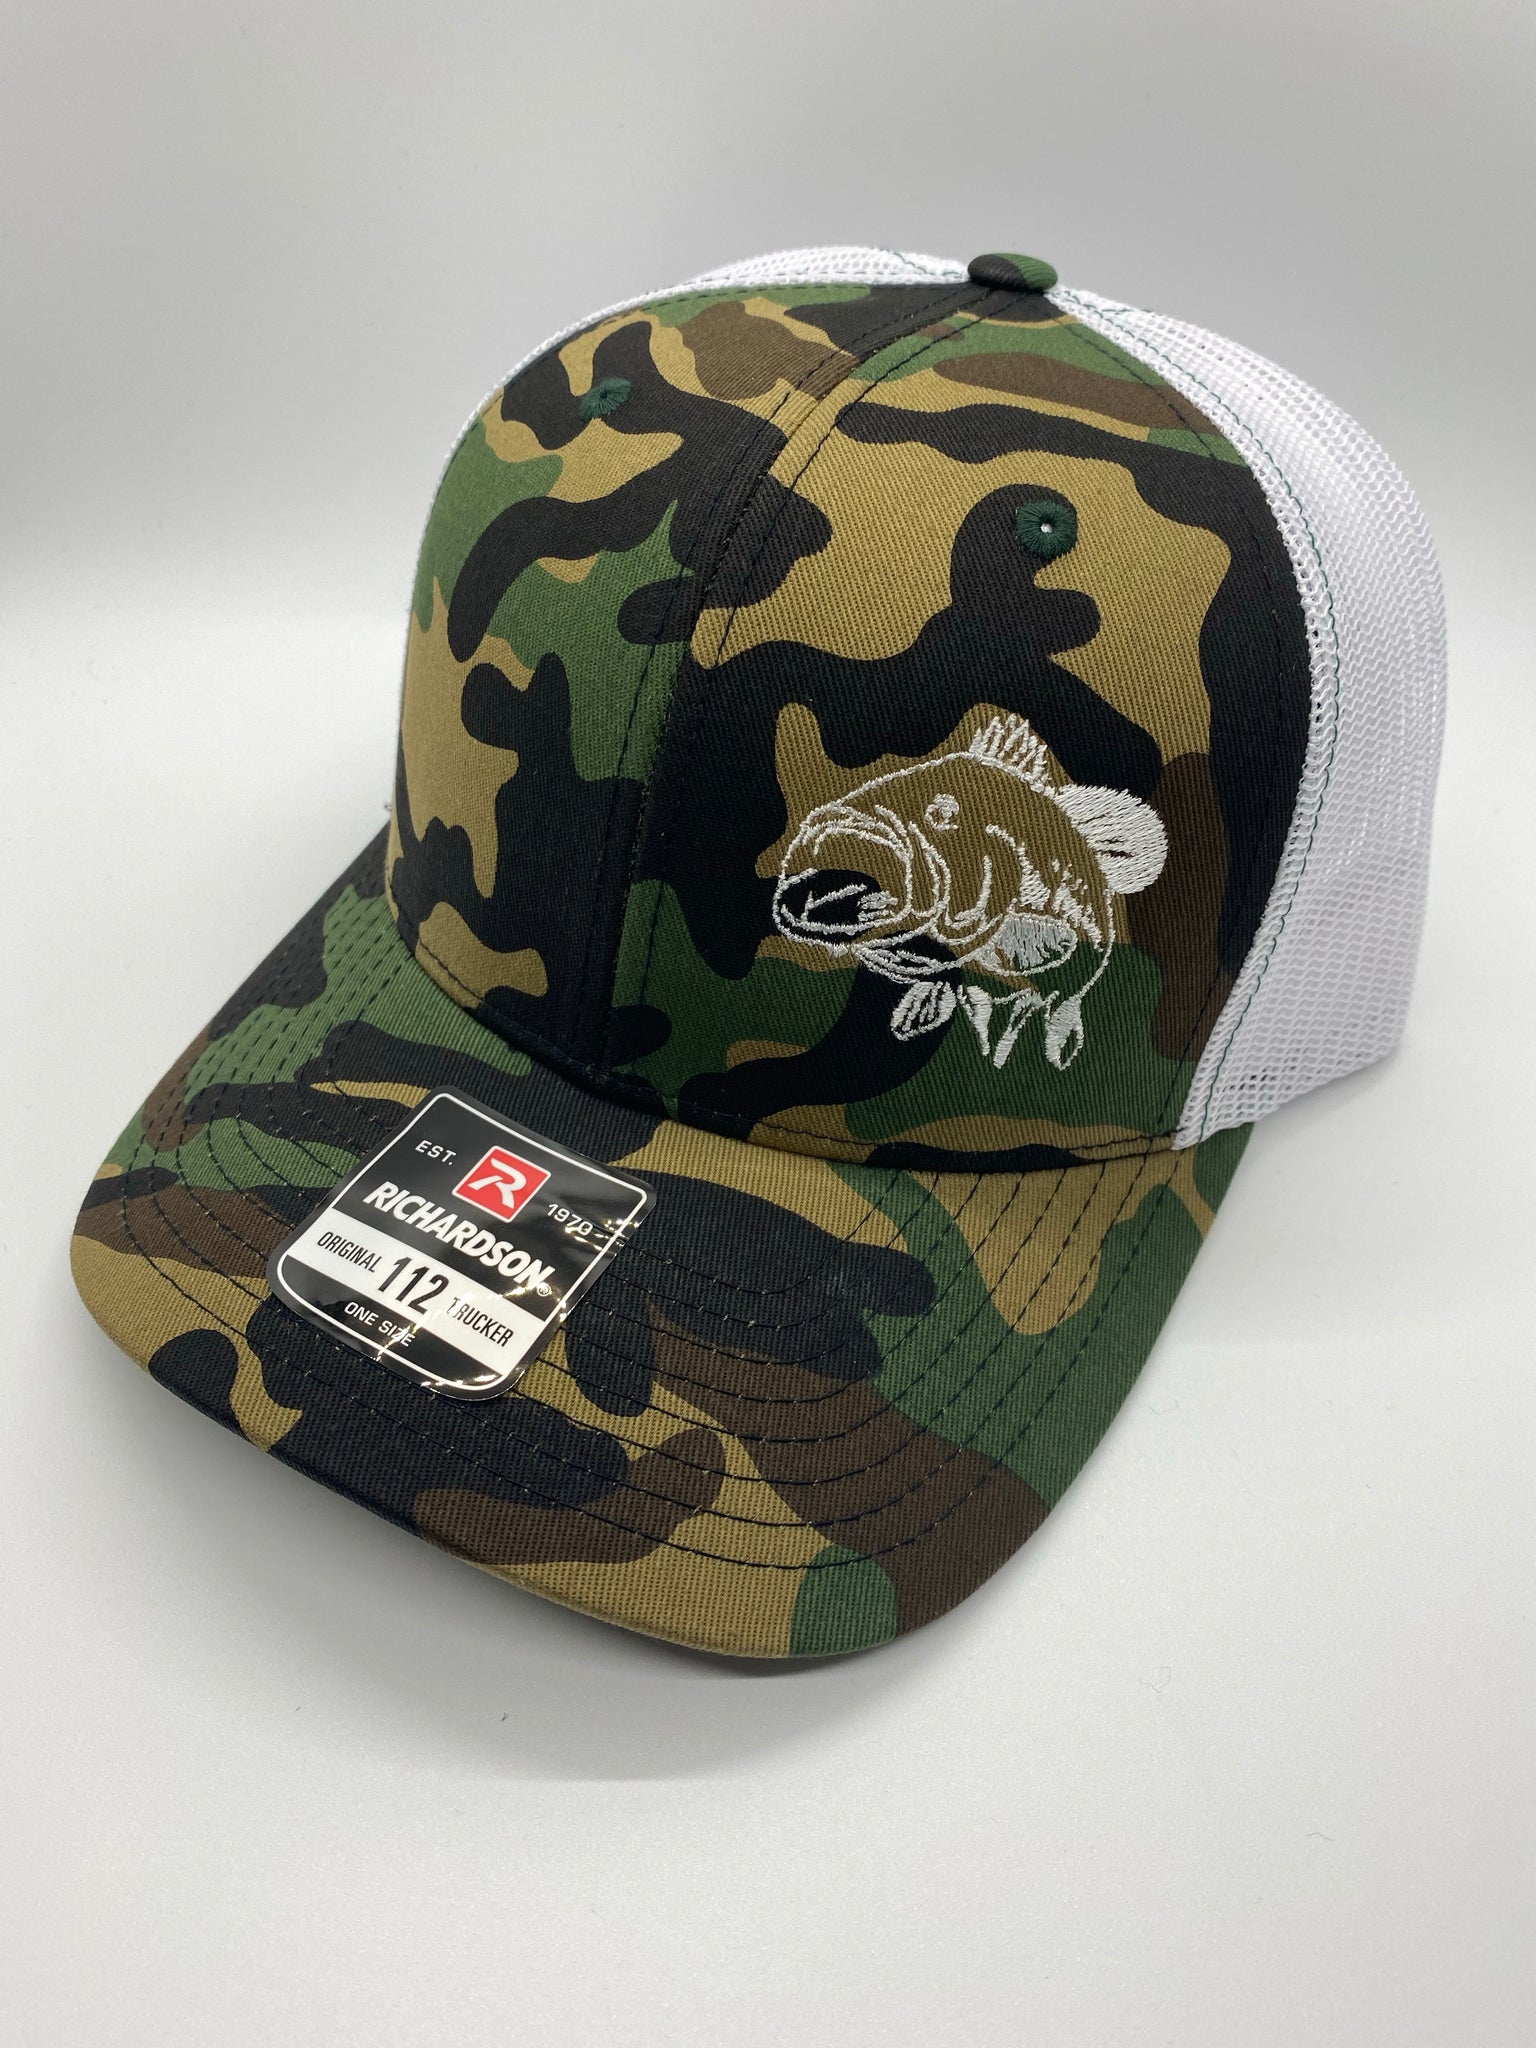 Snapback Embroidered Trucker Hat – Bassdope Lures